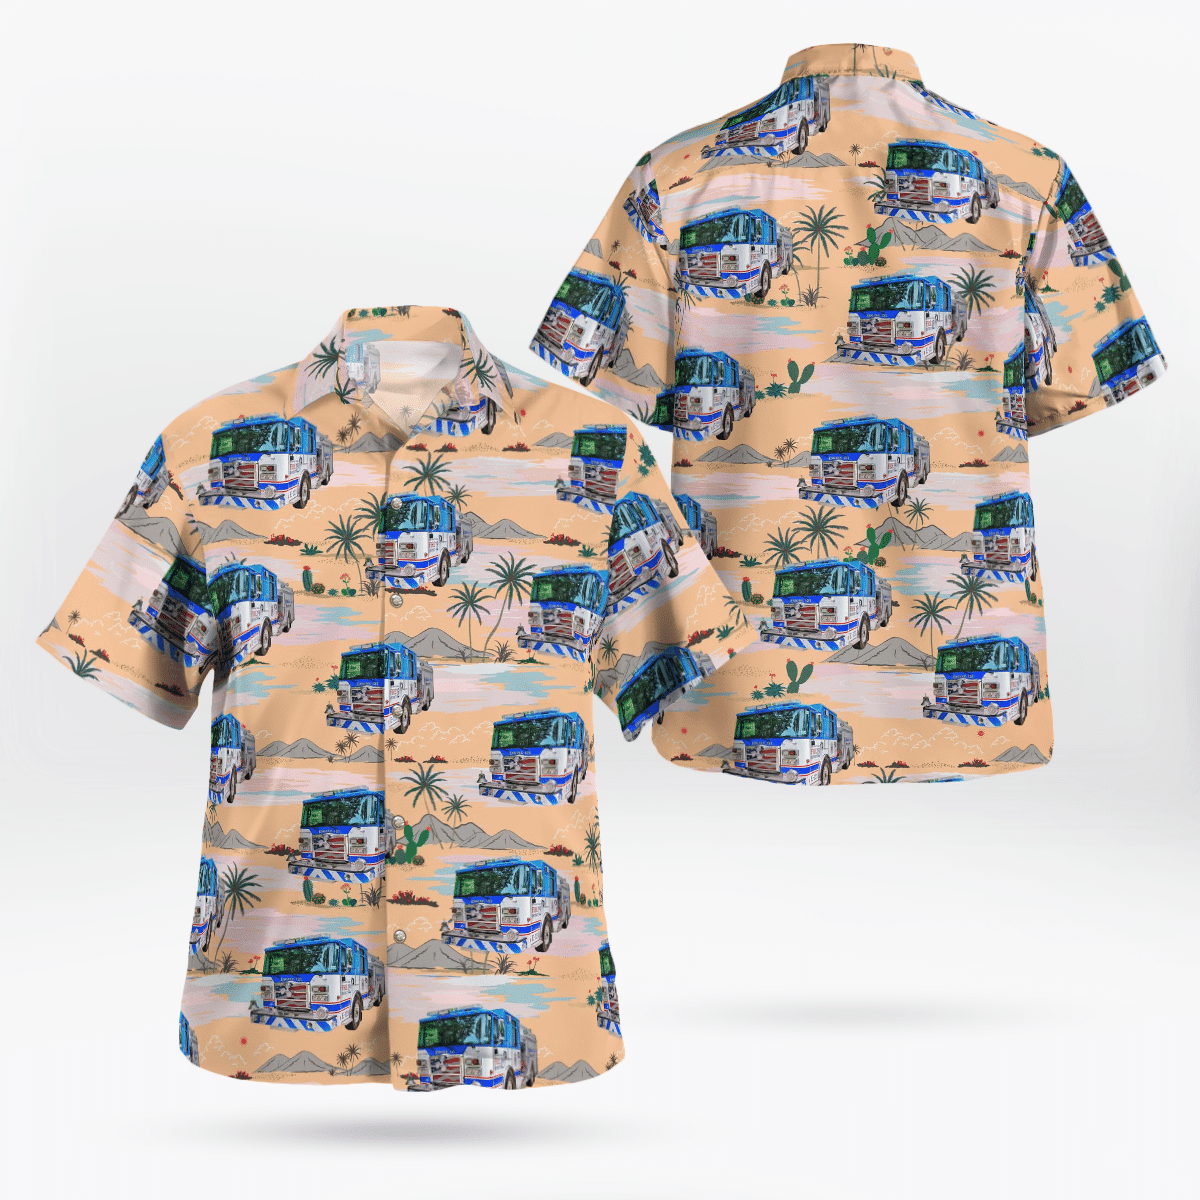 Shop now to find the perfect Hawaii Shirt for your hobby 150